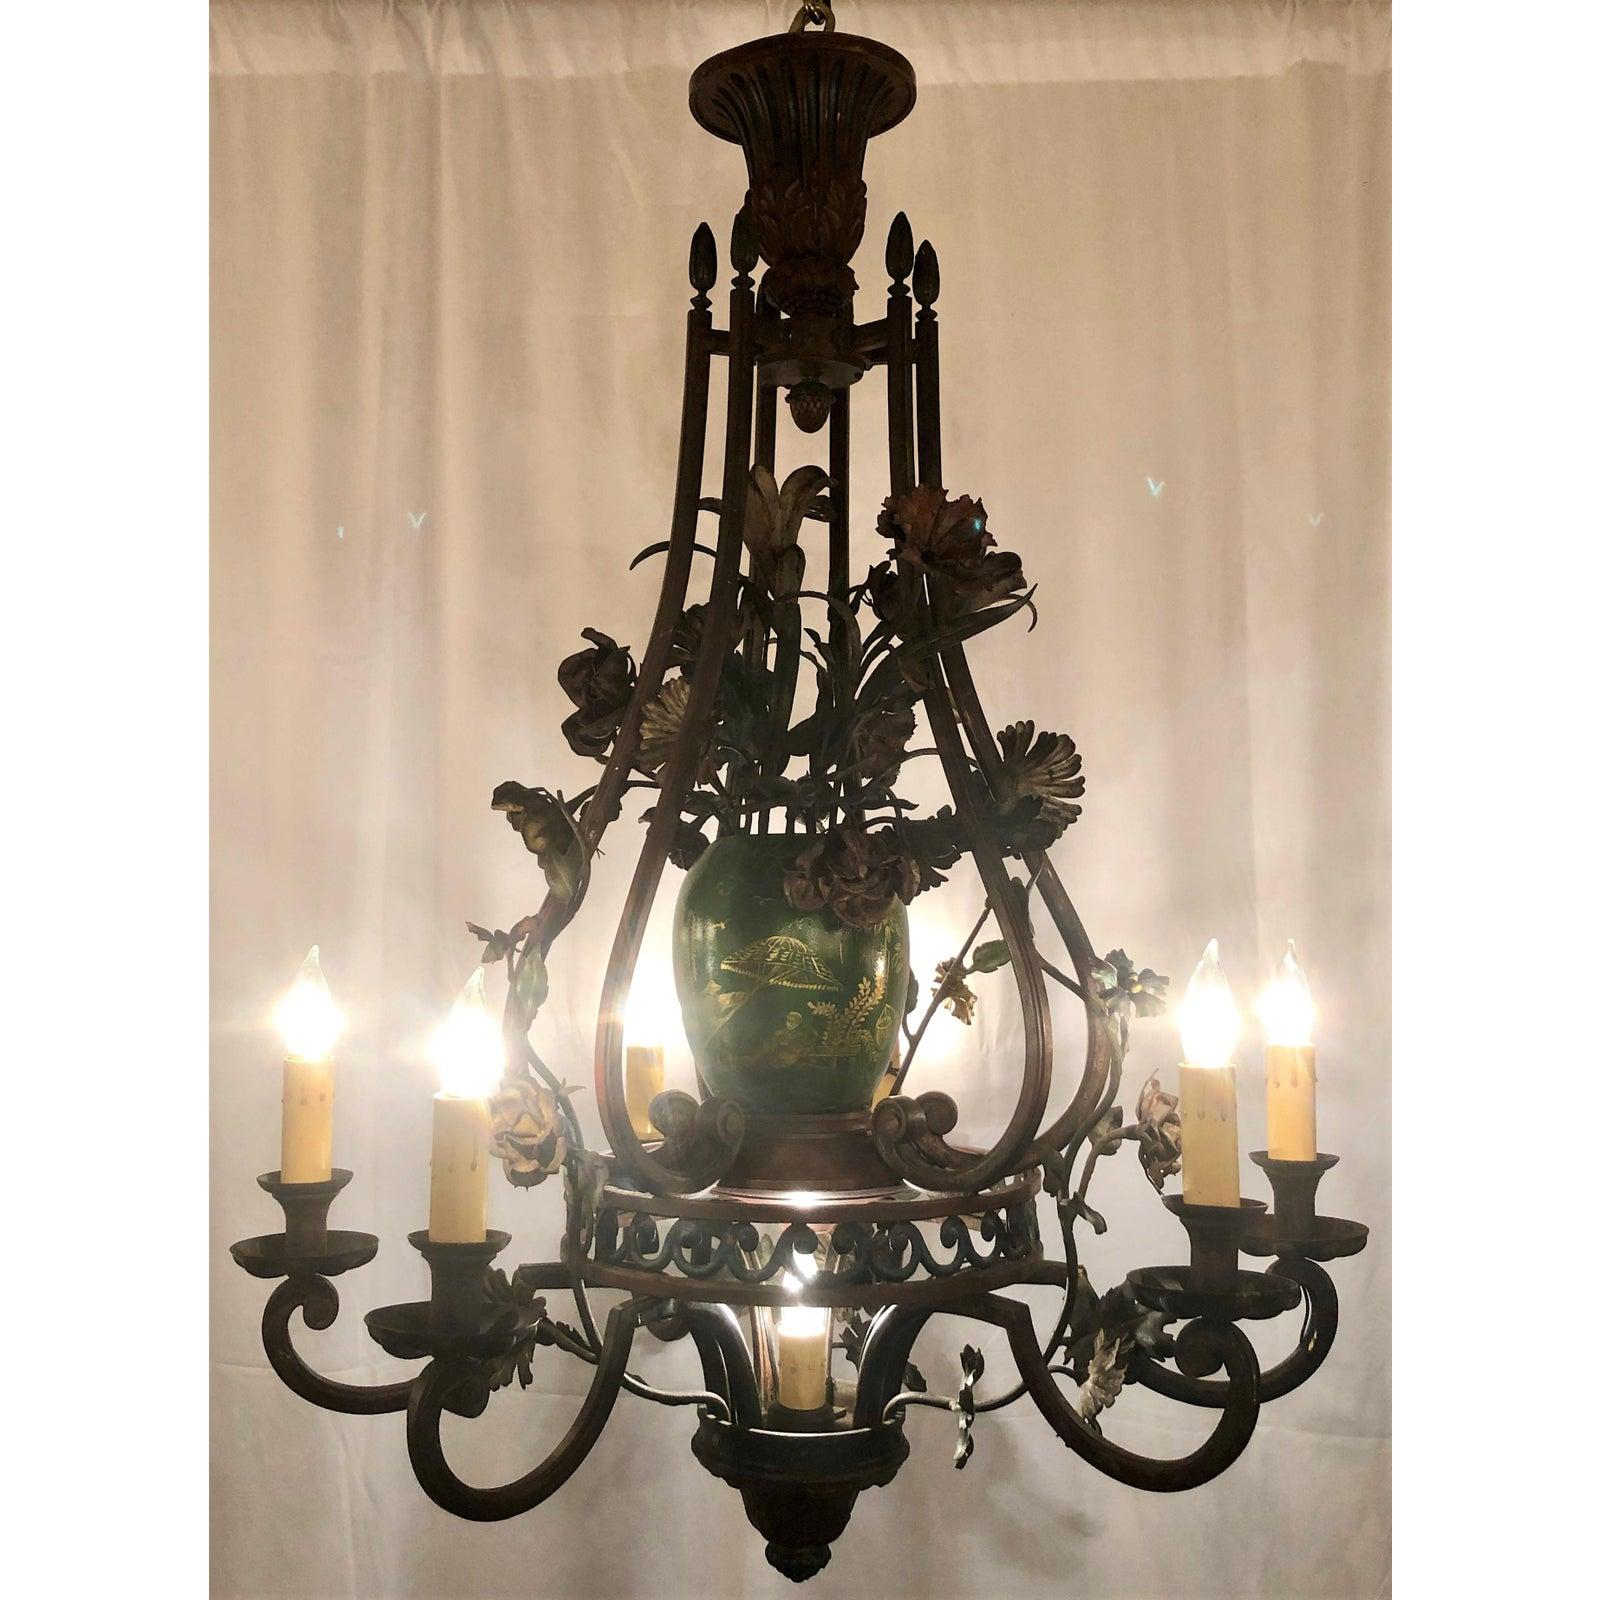 Antique Early 19th Century French Iron and Tole Chandelier In Good Condition For Sale In New Orleans, LA